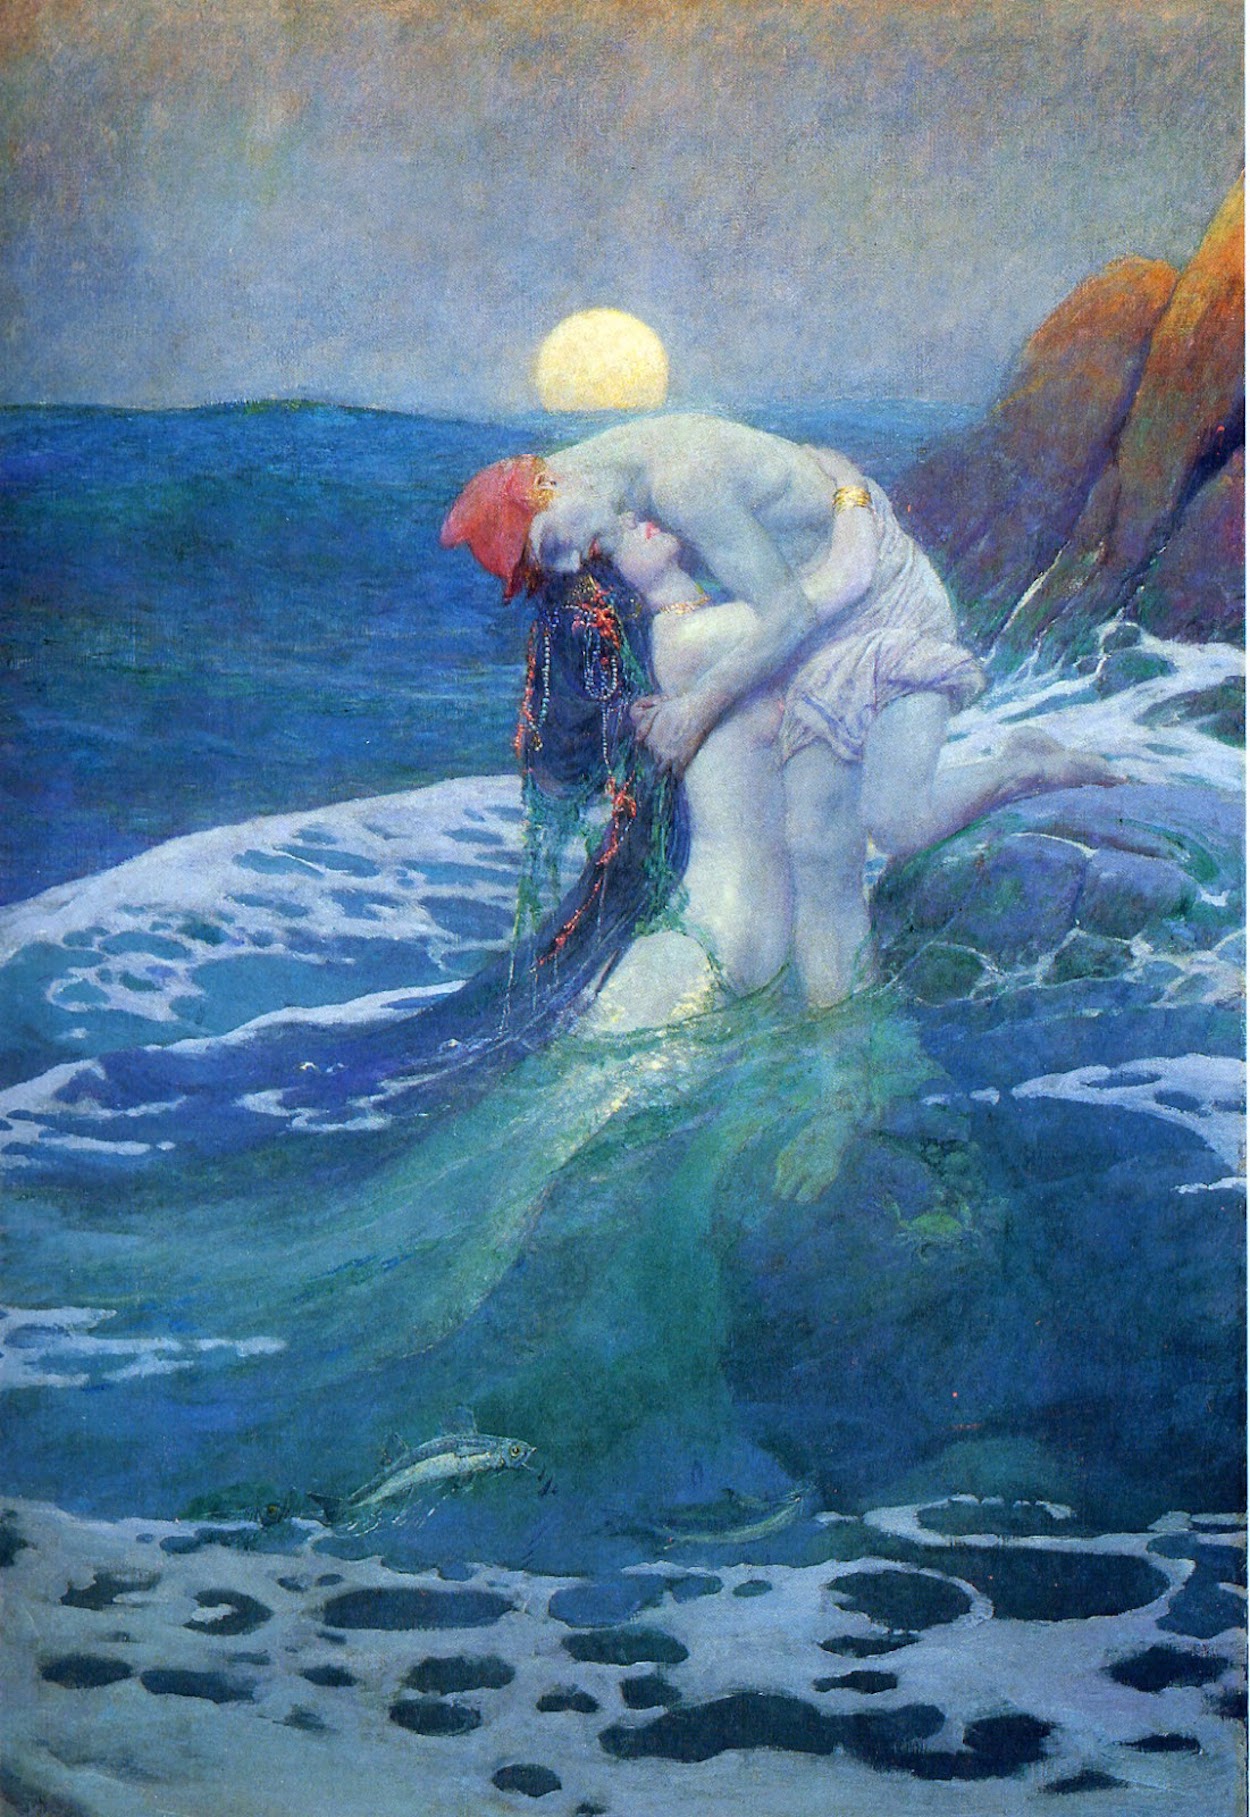 The Mermaid by Howard Pyle - 1910 - 57 7/8 x 40 1/8 inches Delaware Art Museum